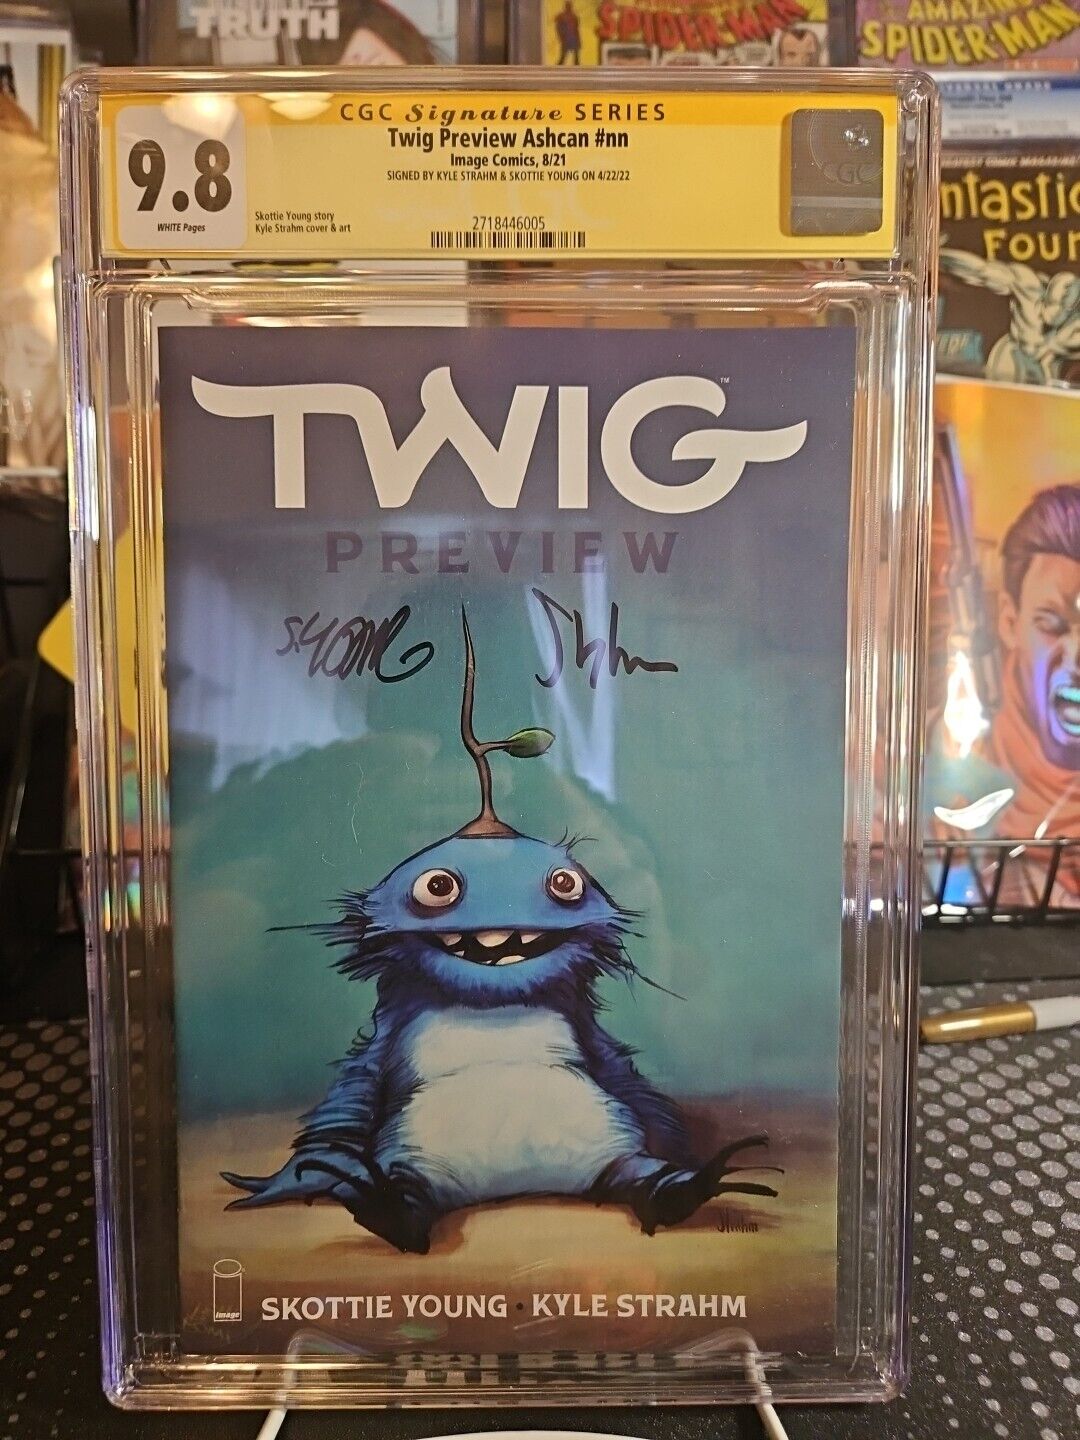 Twig Preview Ashcan #nn CGC 9.8  S.S. signed Young And Strahm(Image 2021)